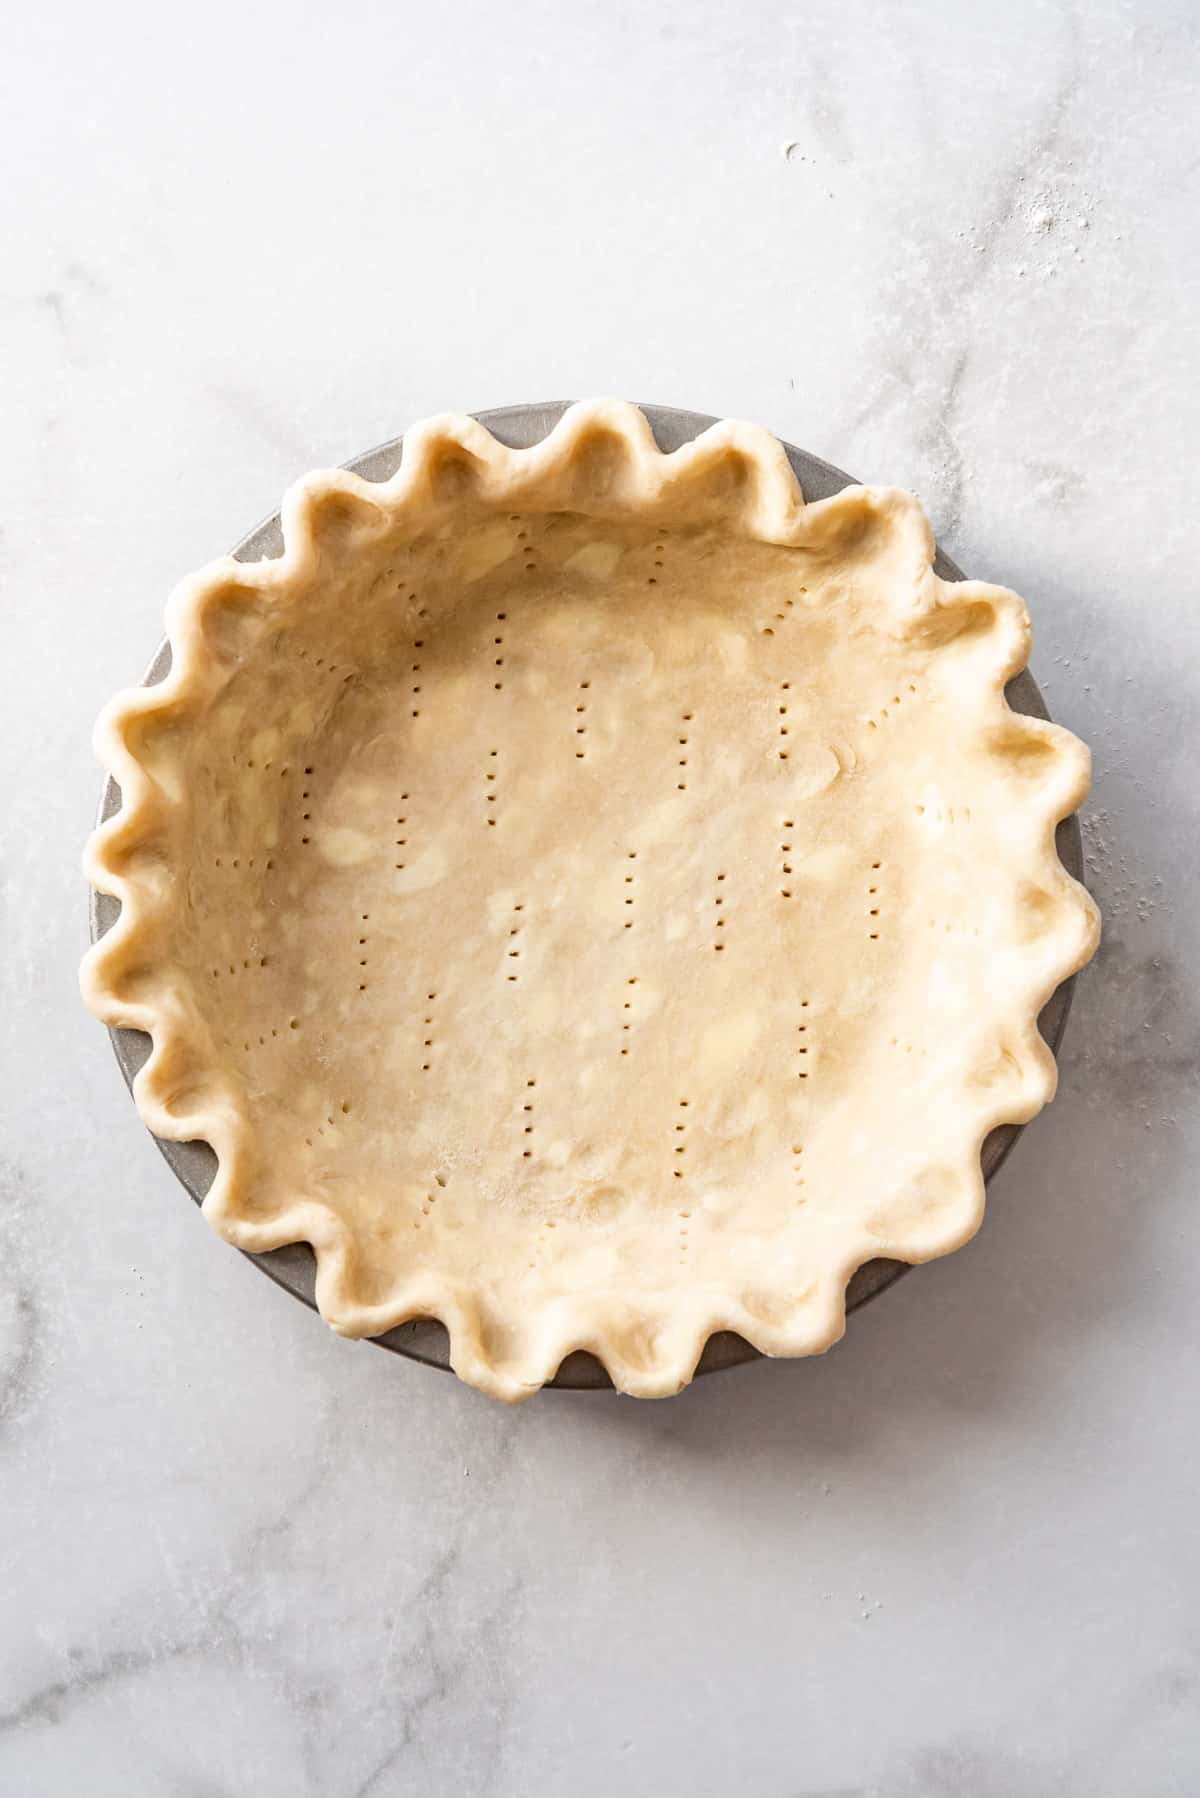 An unbaked pie crust that has been pricked all over with the tines of a fork.